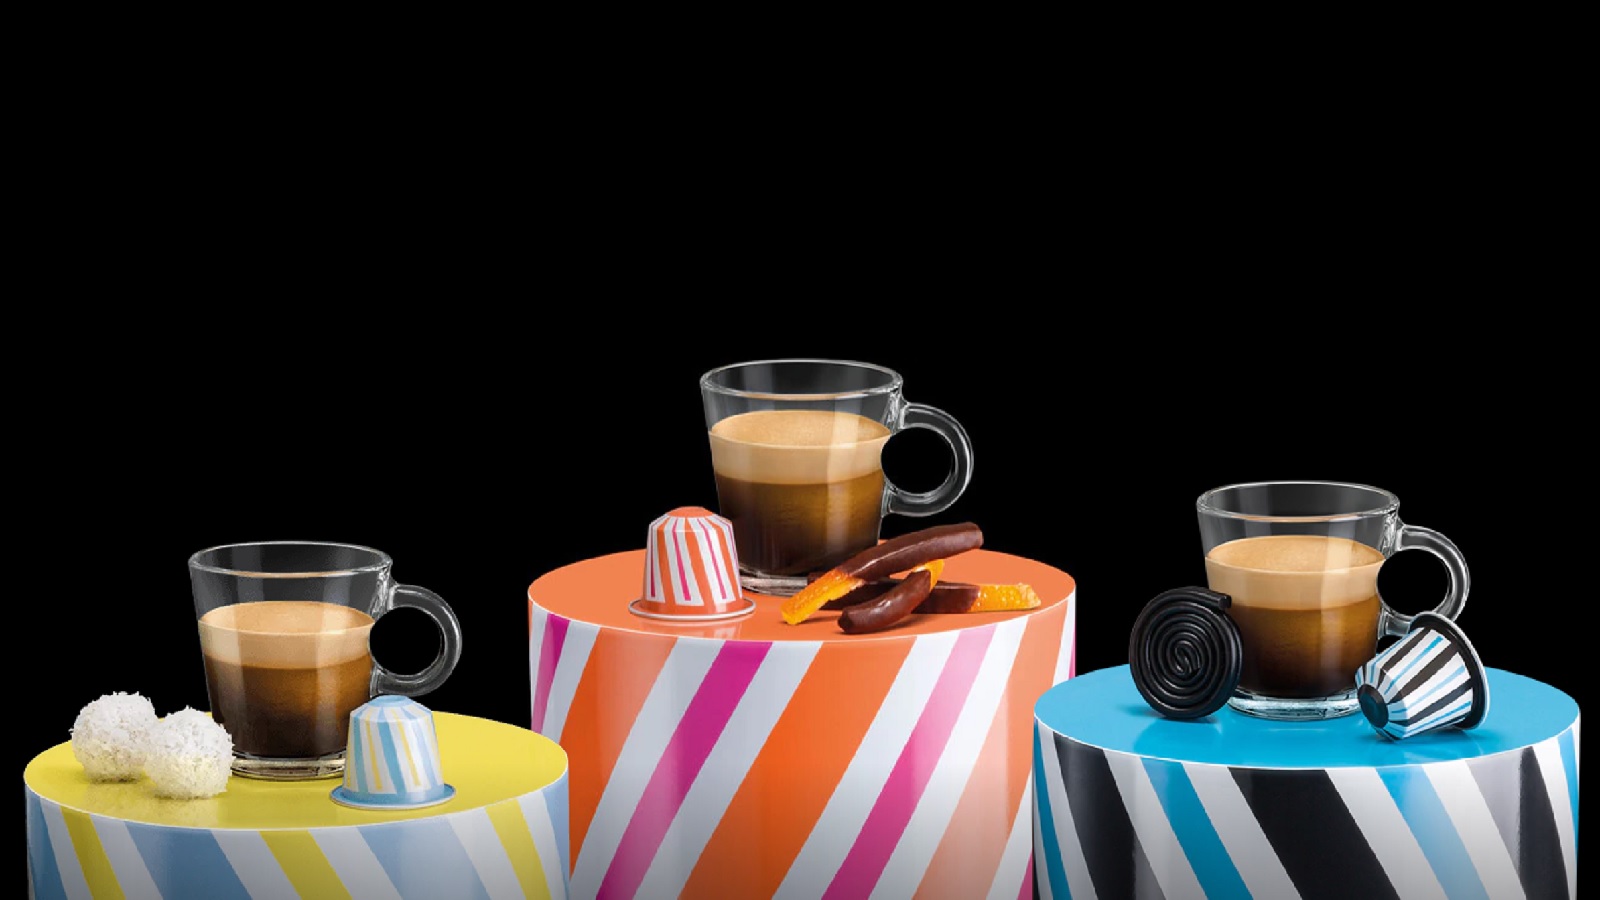 Nespresso Brings Joy in Every Cup to Greet Christmas